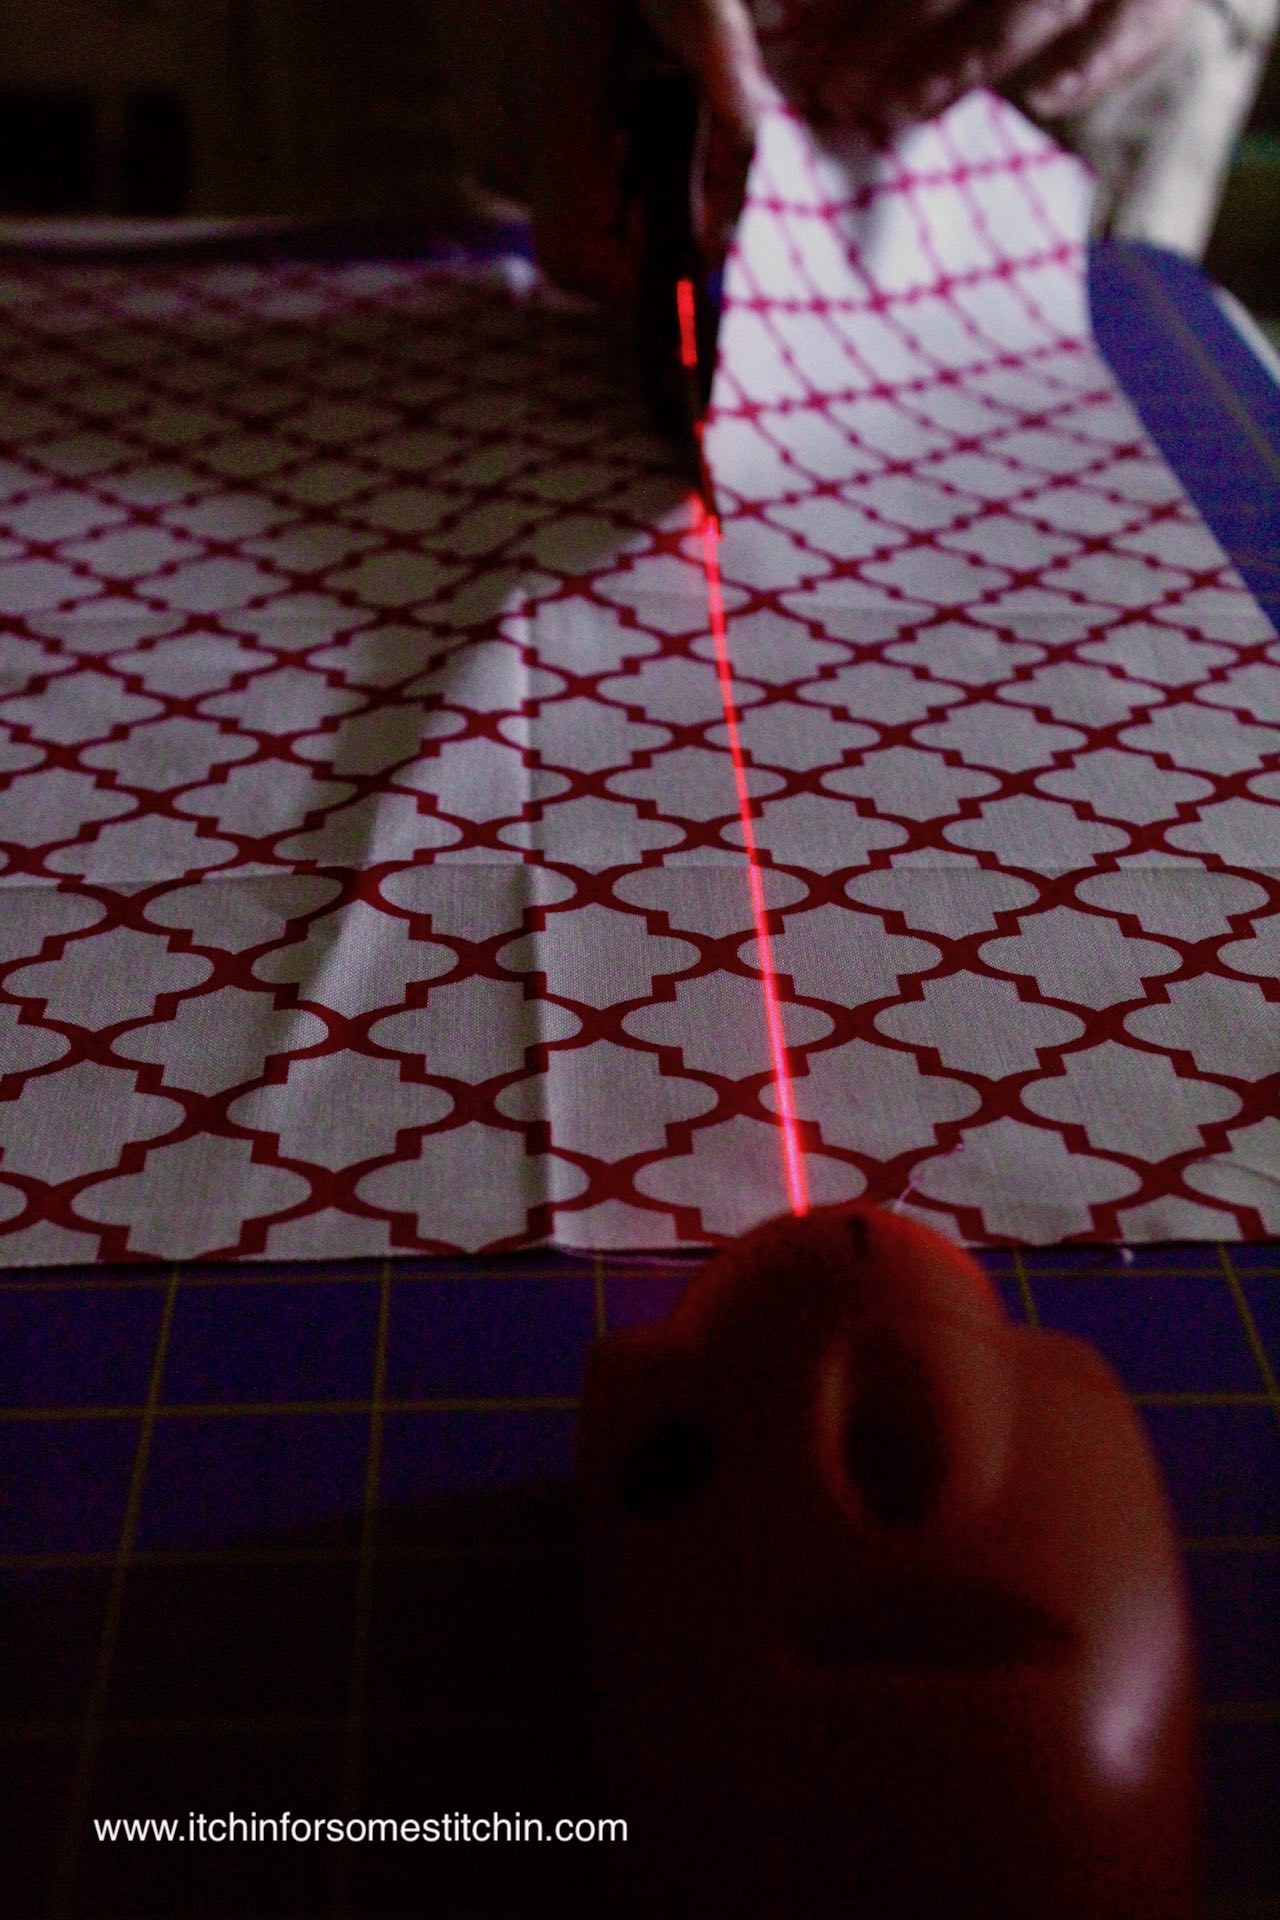 How to cut your fabric perfectly straight with the KISS sewing Laser by www.itchinforsomestitchin.com